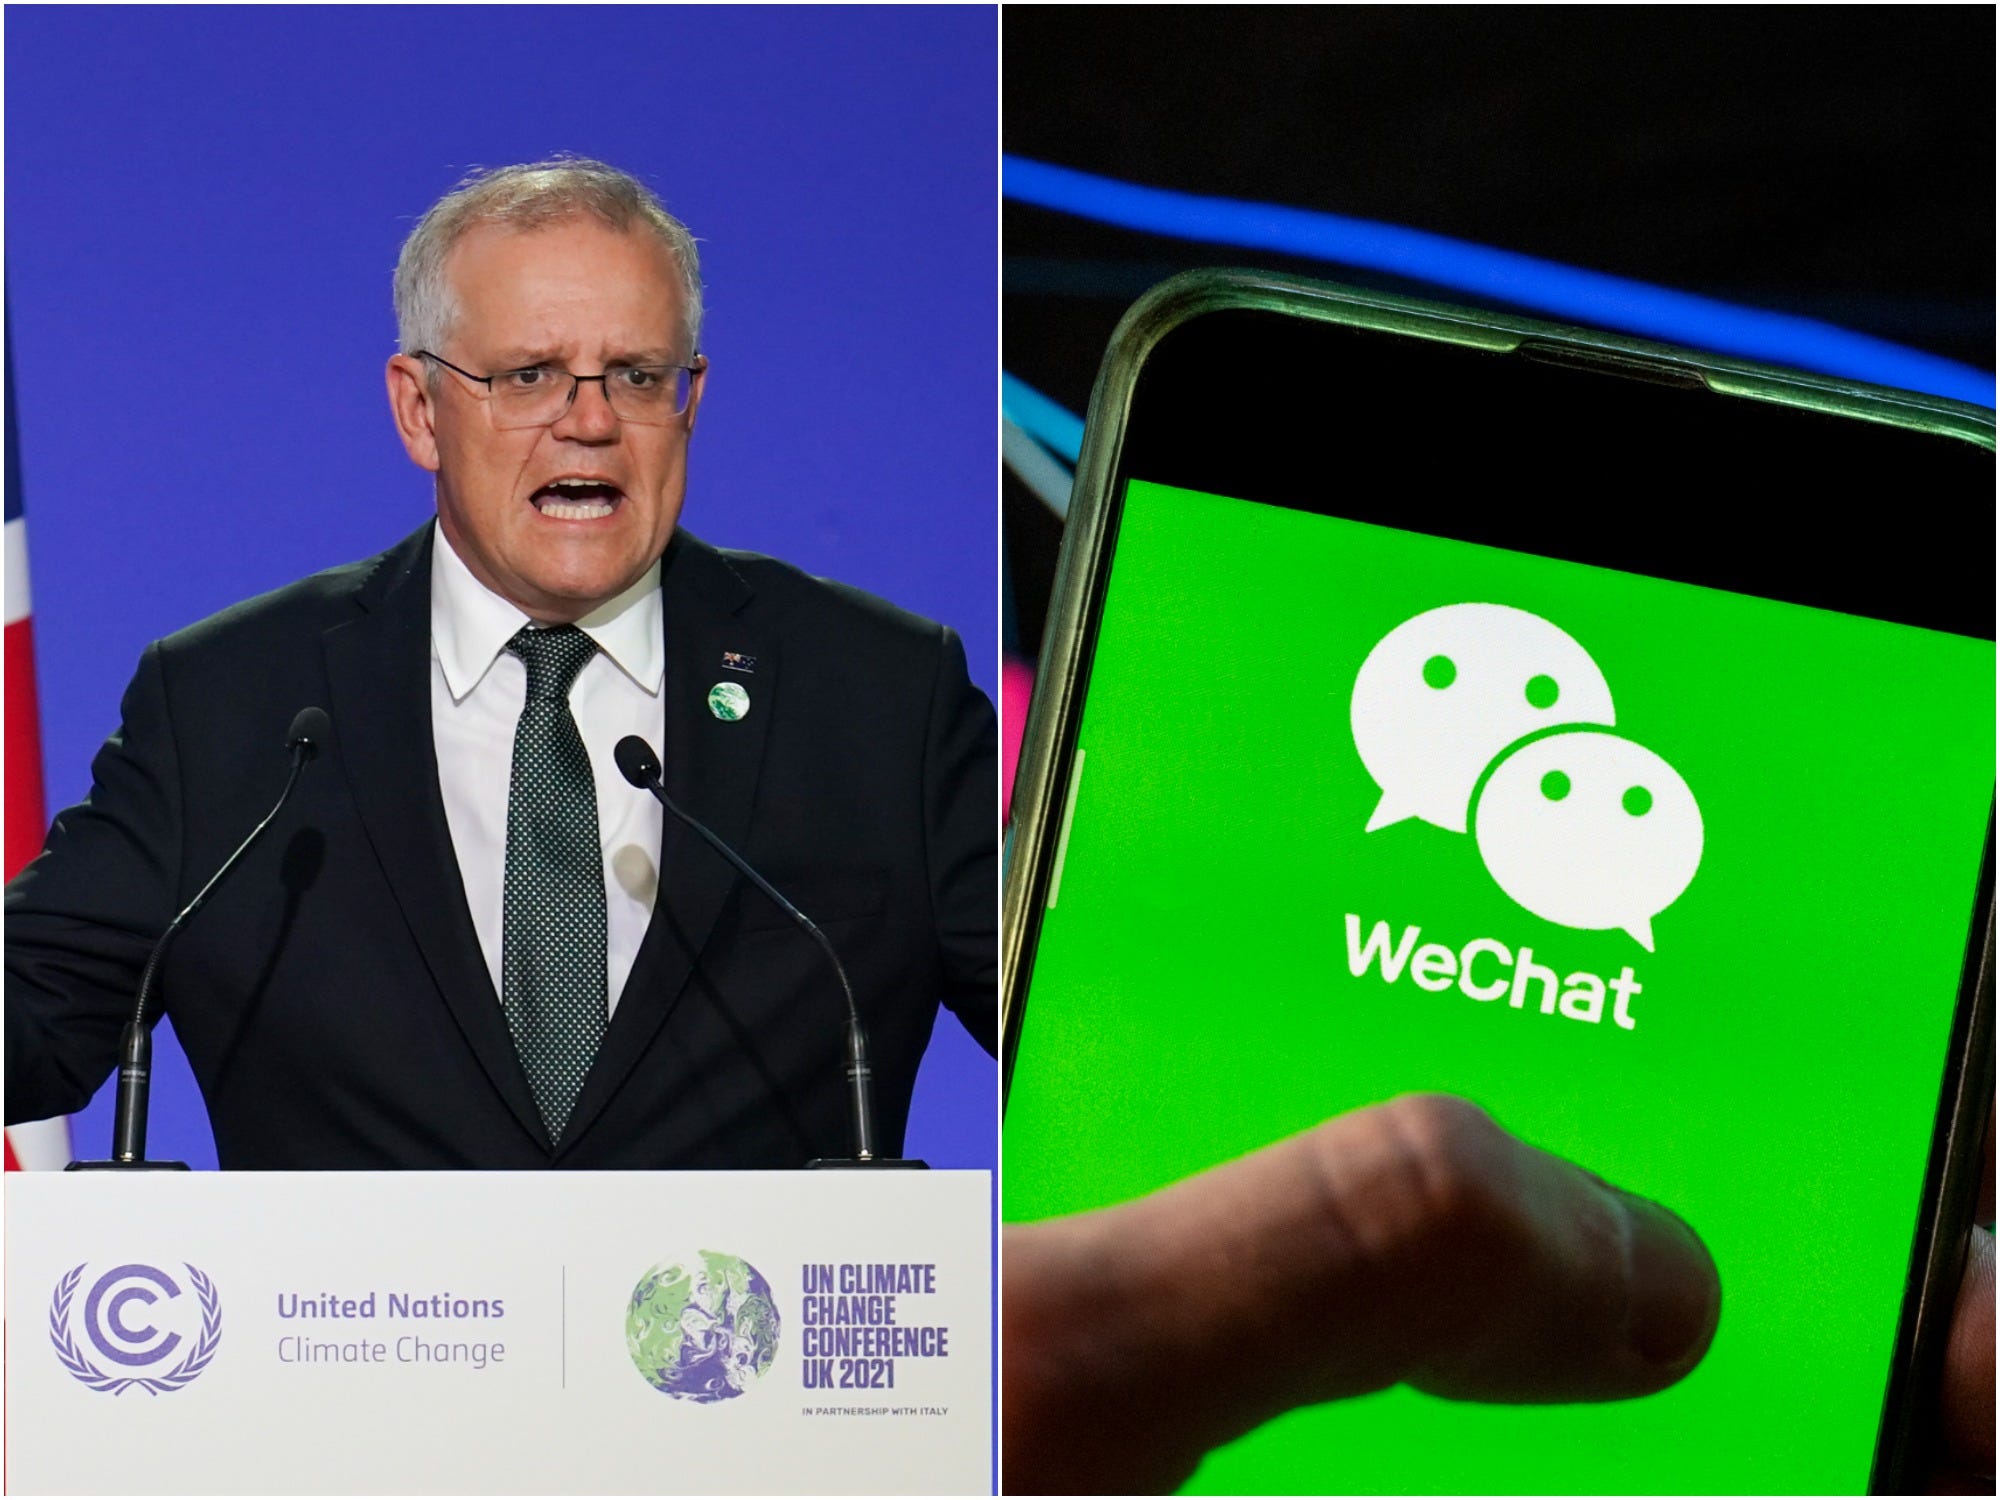 Australia's PM Scott Morrison next to a picture of the WeChat app on a phone